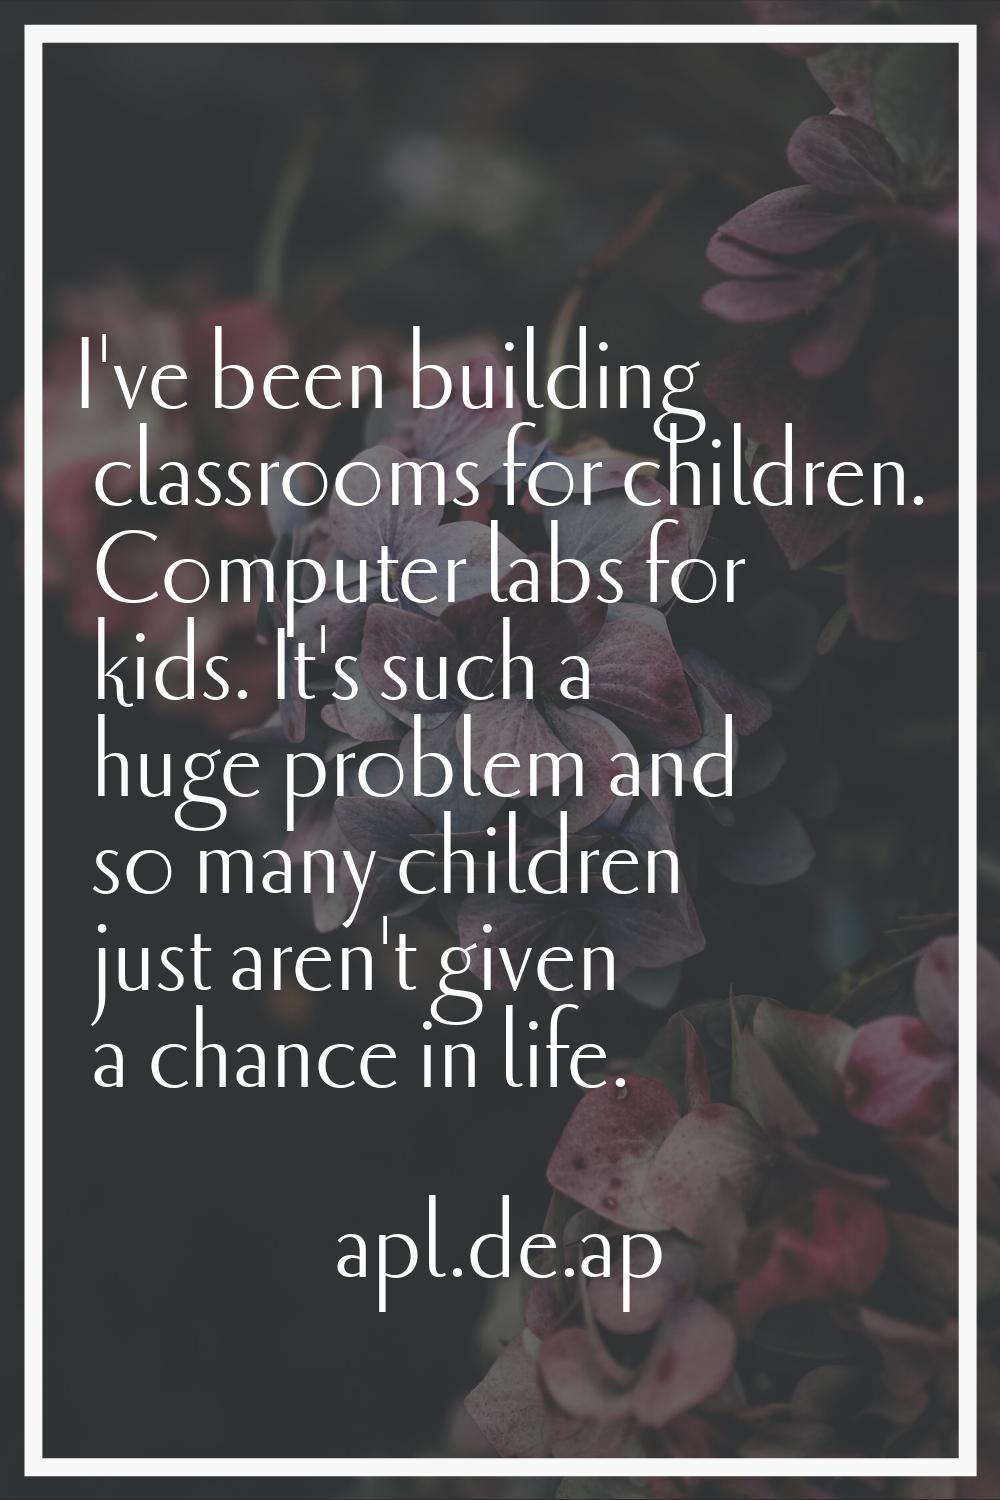 I've been building classrooms for children. Computer labs for kids. It's such a huge problem and so